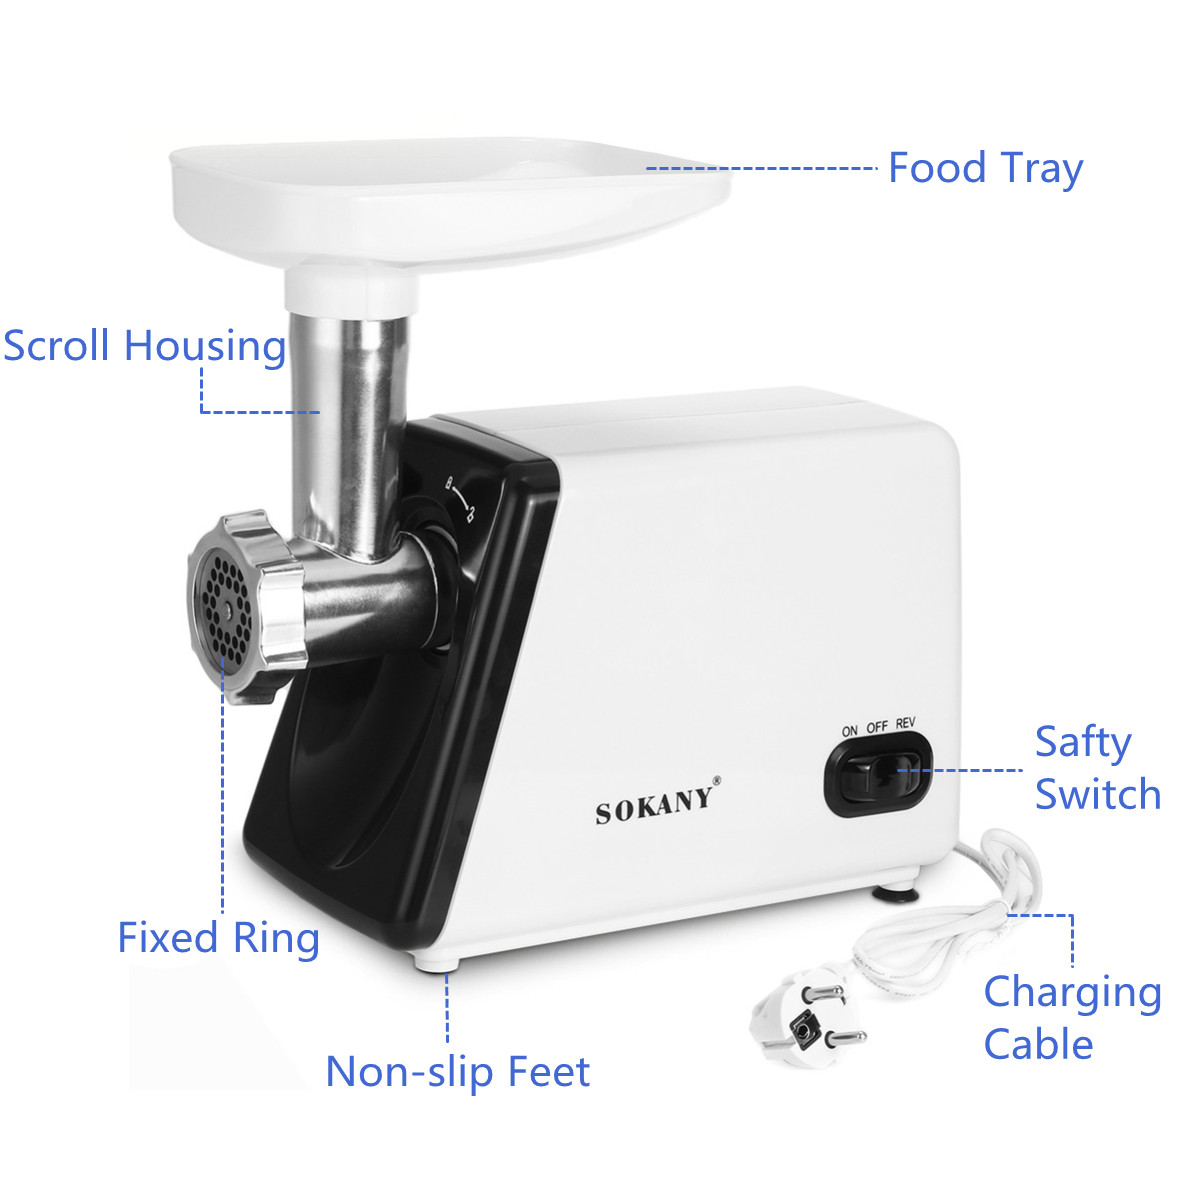 1PCS-SOKANY-110V-Electric-Household-Multifunctional-Stainless-Steel-Stir-Minced-Meat-Machine-Sausage-1902312-9